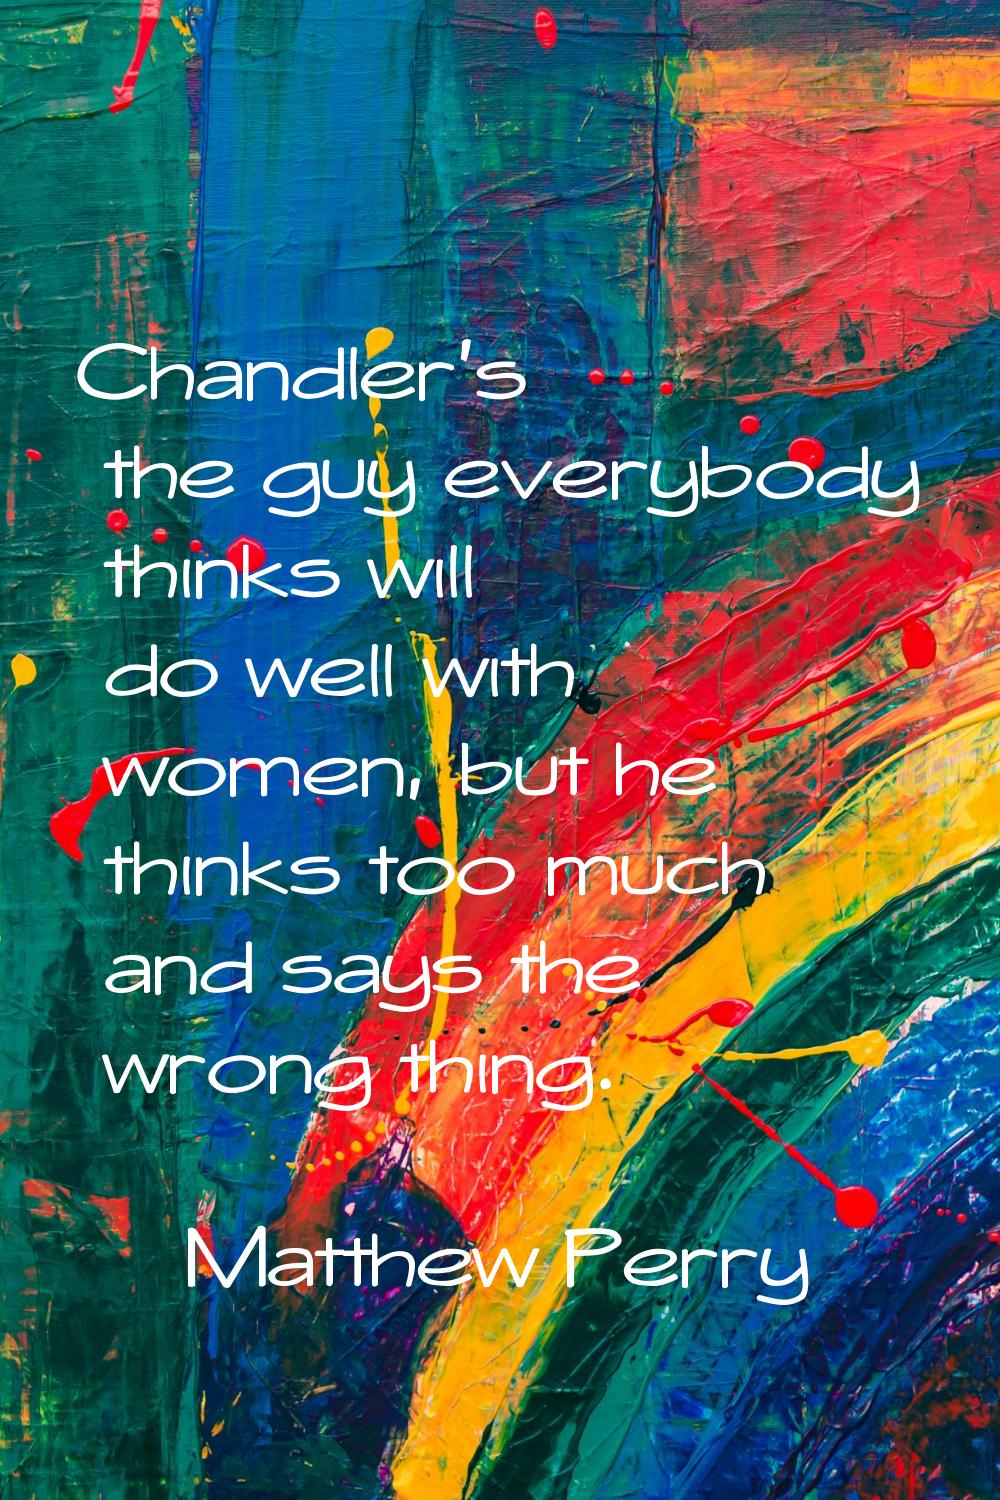 Chandler's the guy everybody thinks will do well with women, but he thinks too much and says the wr